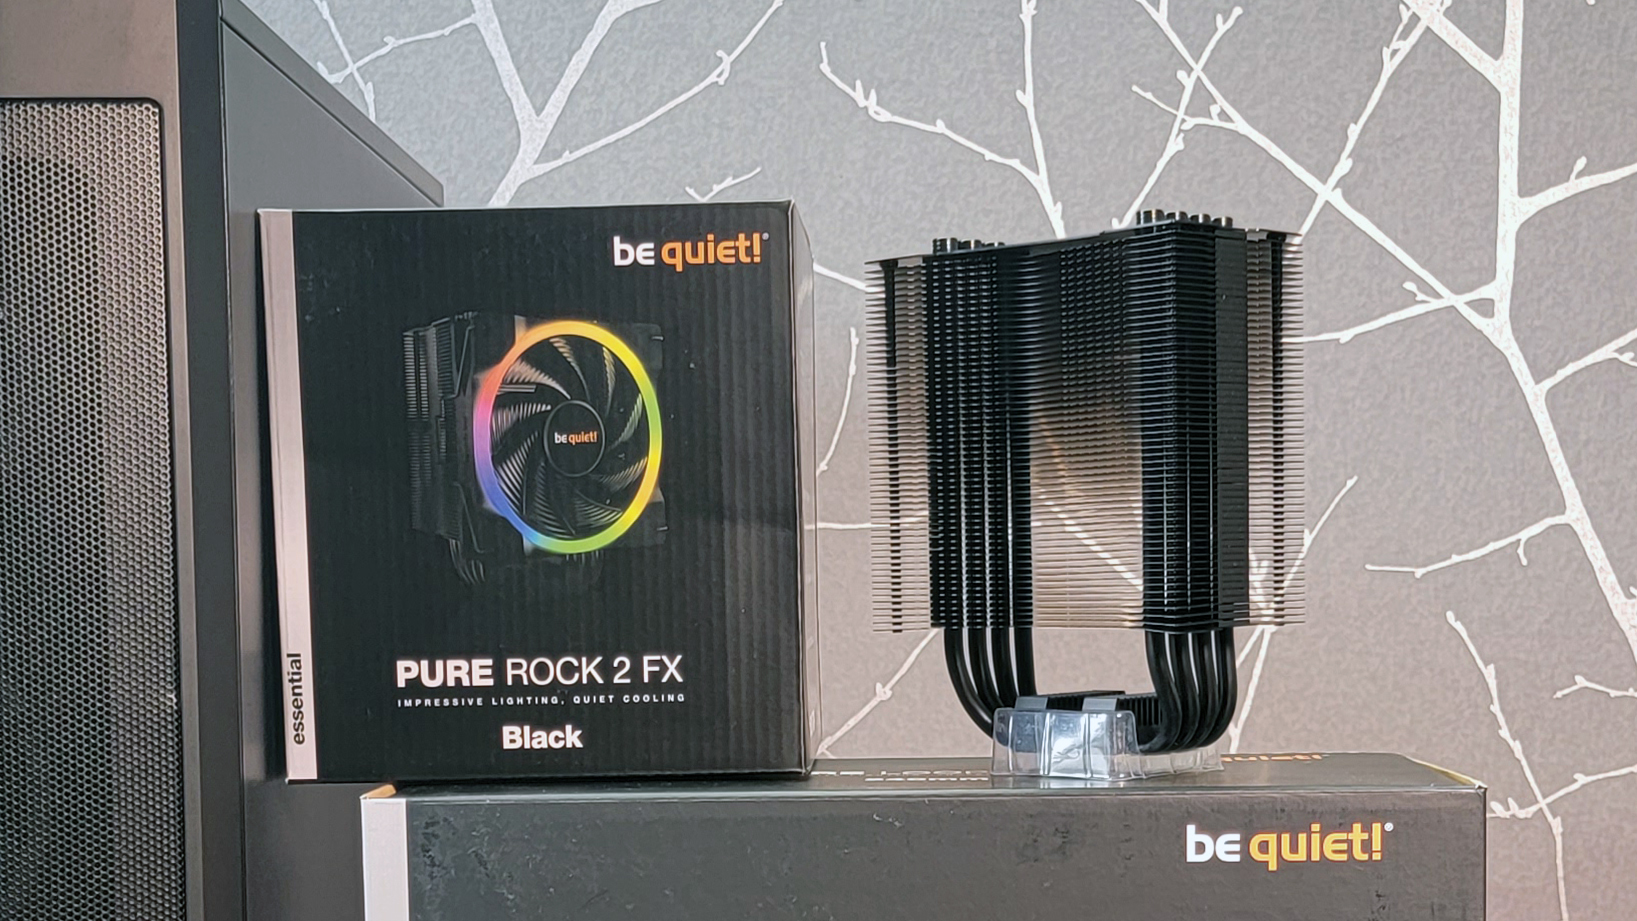 be quiet! FX Coolers and Cases